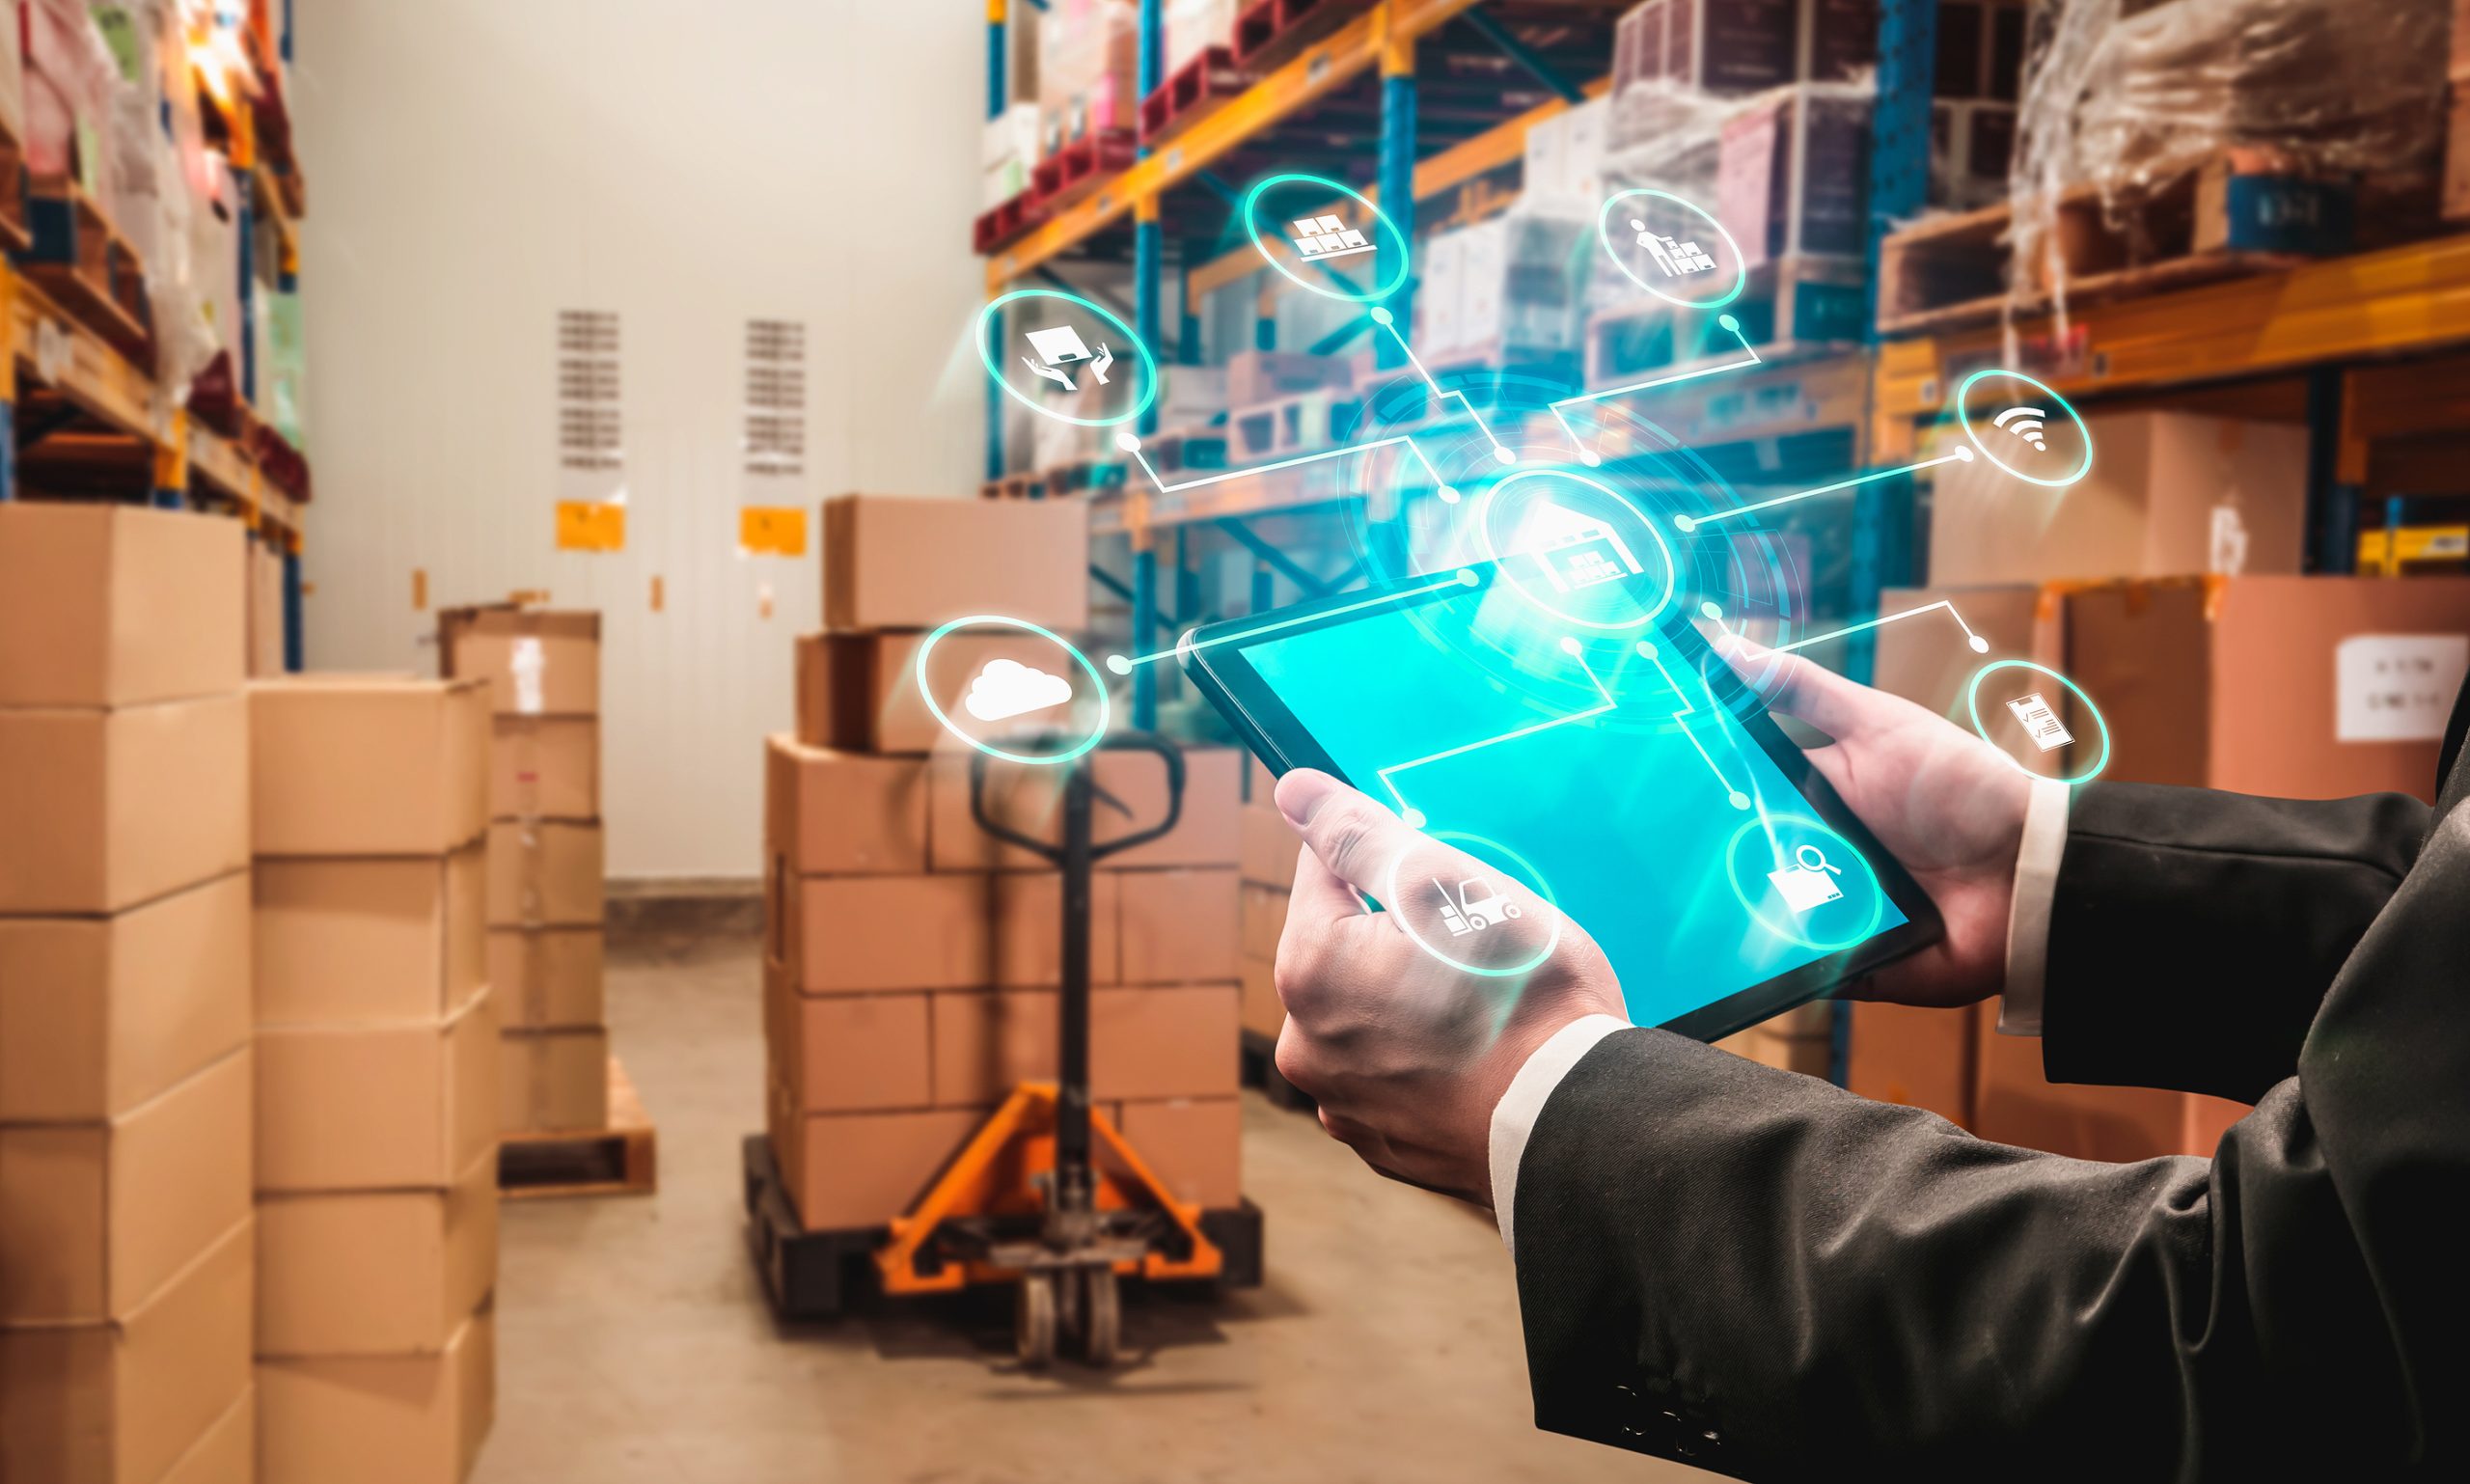 Smart warehouse management system with innovative internet of things technology to identify package picking and delivery . Future concept of supply chain and logistic network business .